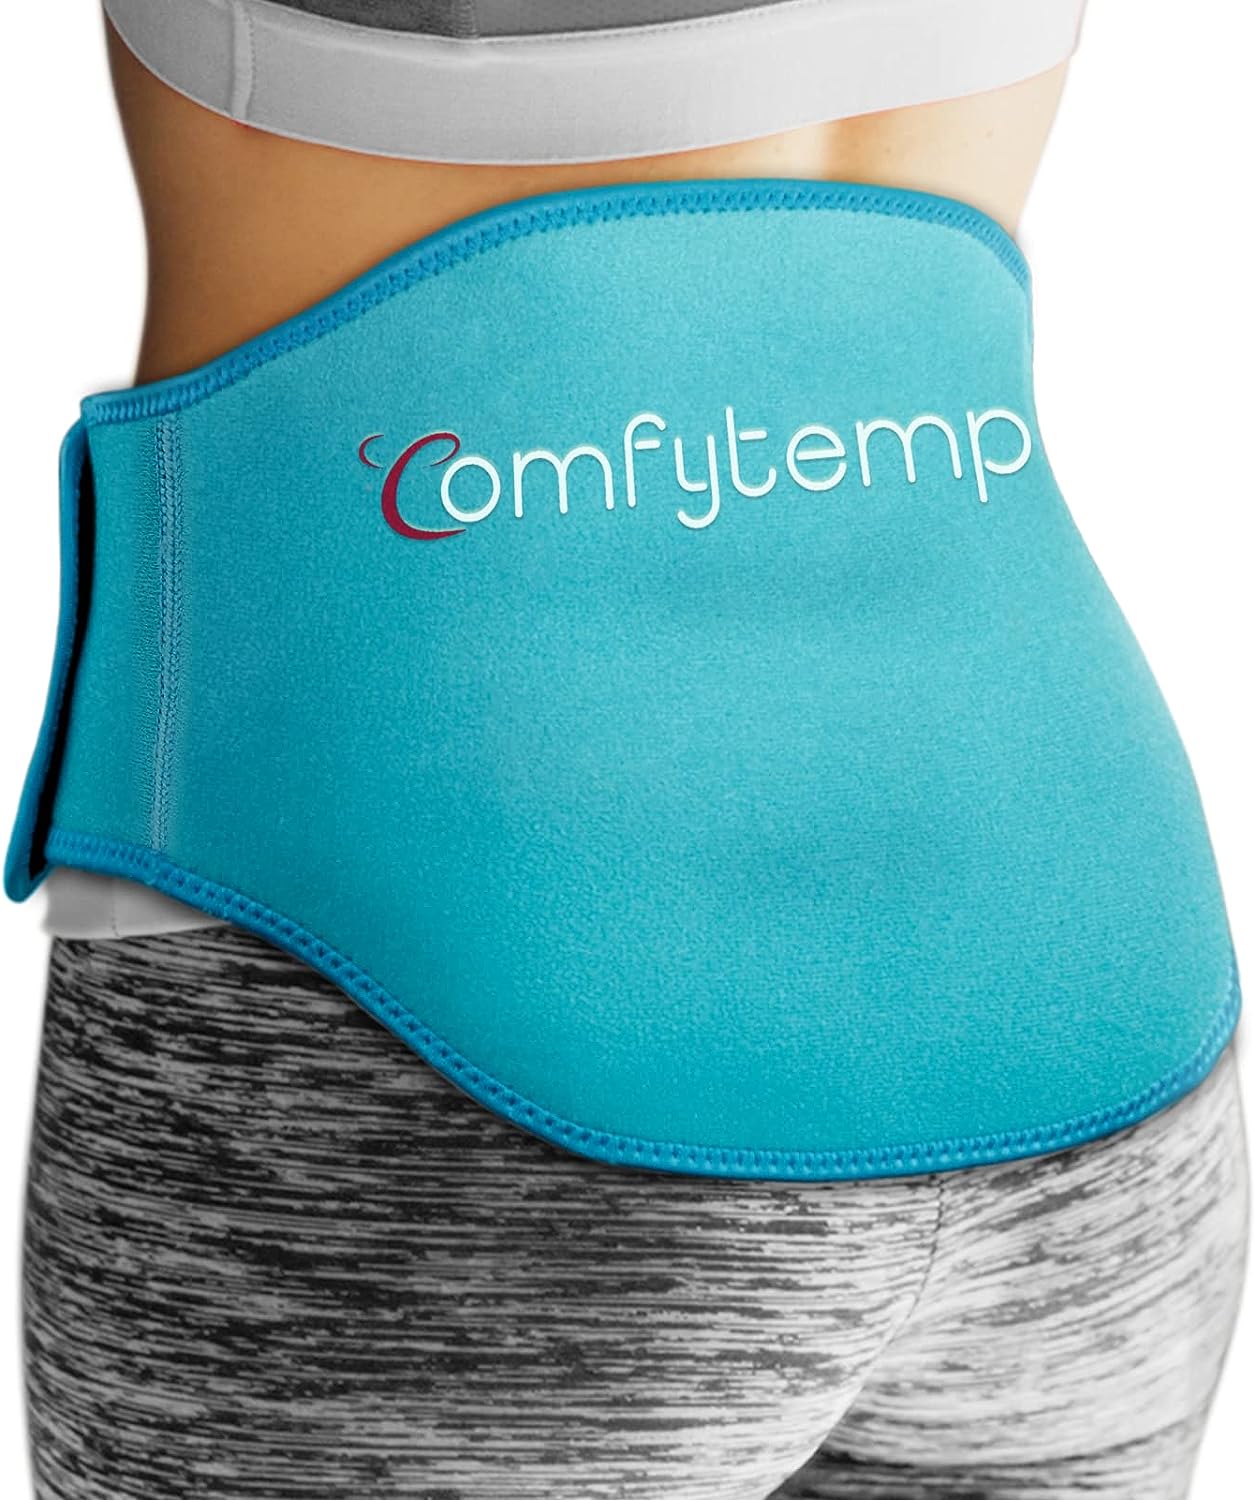  Comfytemp Large Ice Packs For Injuries Reusable Gel